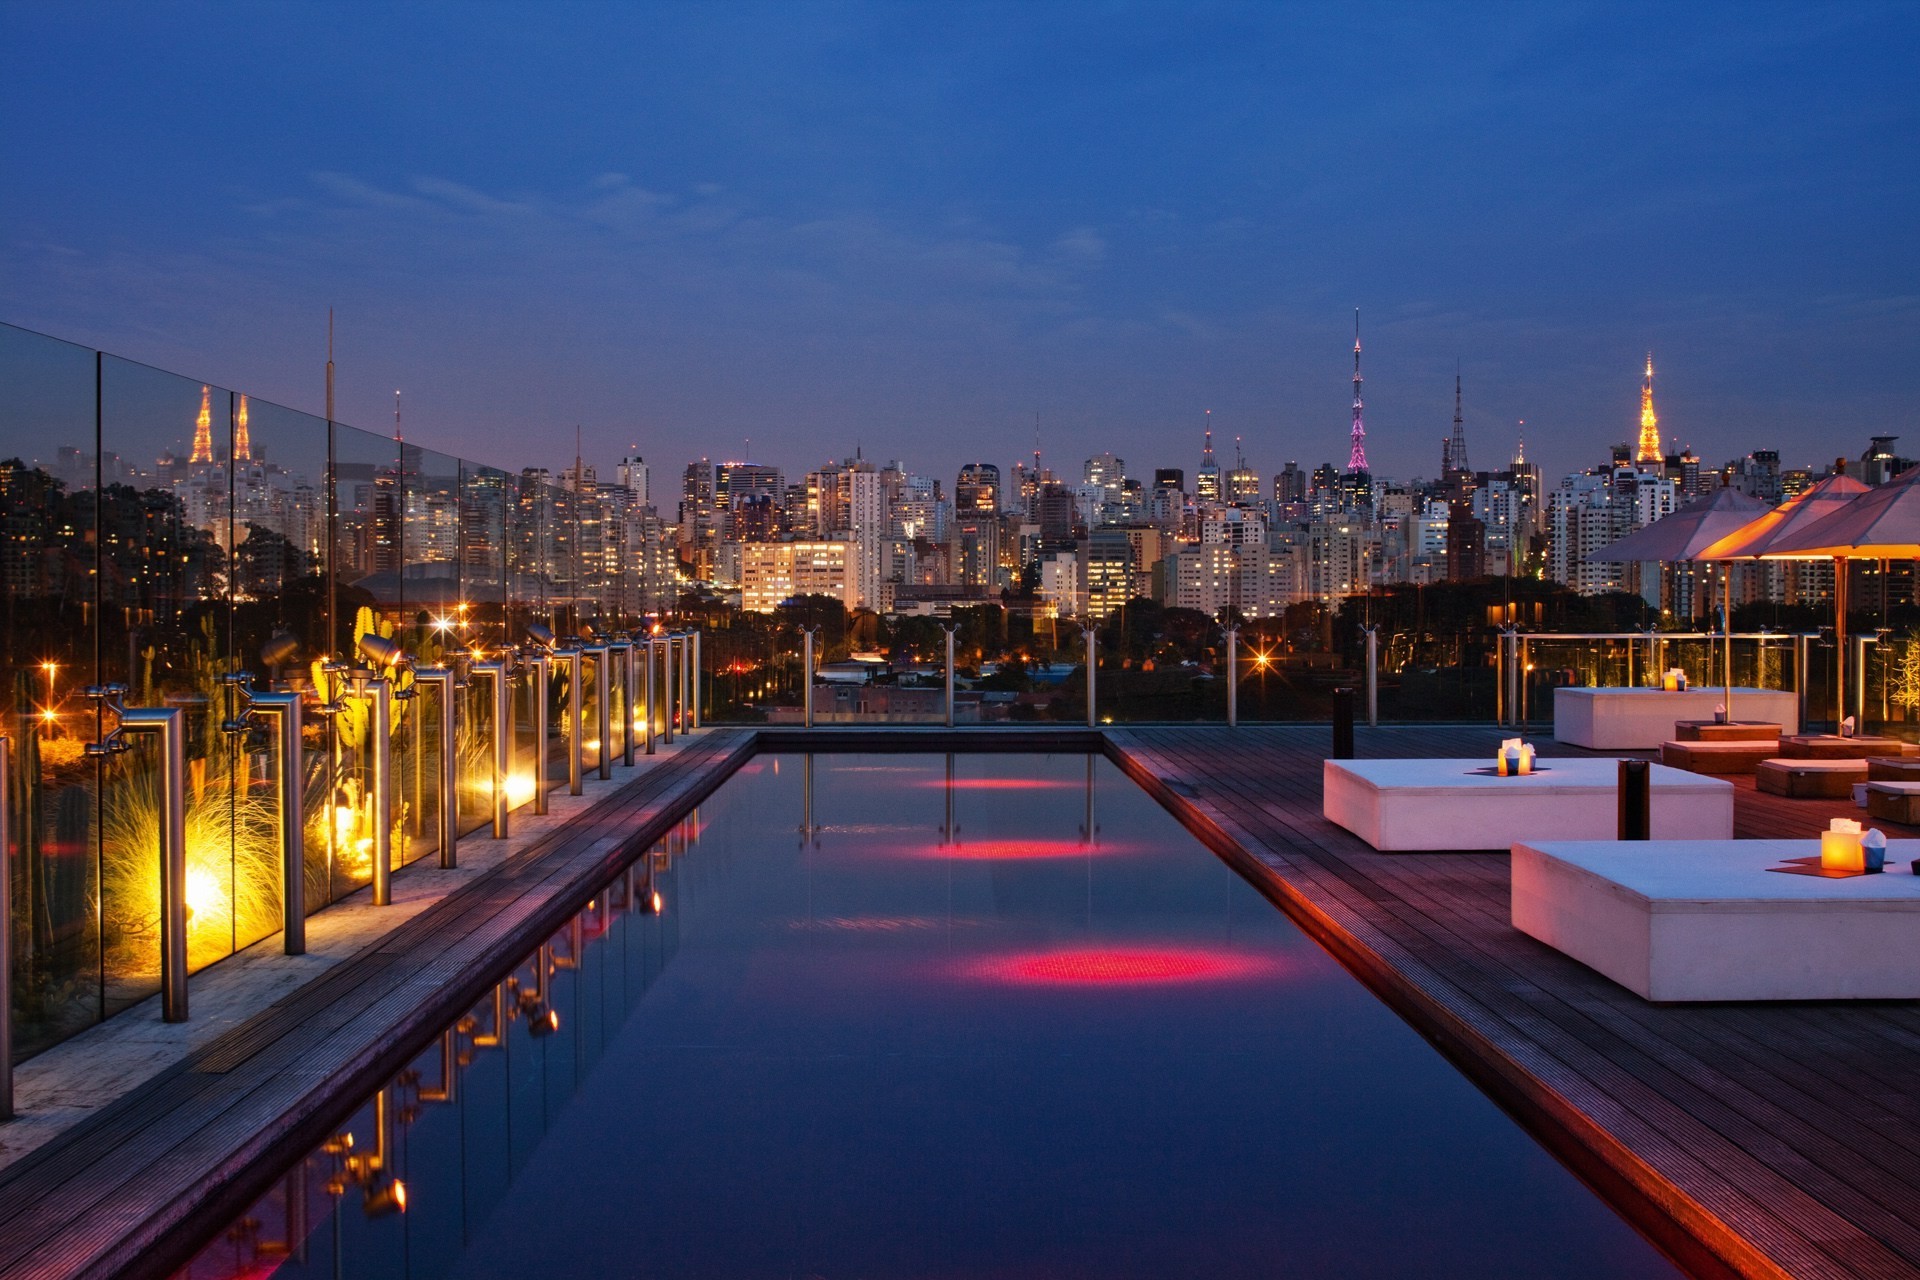 cityscape, City, Architecture, Night, Building, Skyscraper, Lights, Street light, Clouds, São paulo, Brasil, Swimming pool, Hotels, Wooden surface, Deck chairs, Table, Parasol, Tower, Reflection, Luxury Wallpaper